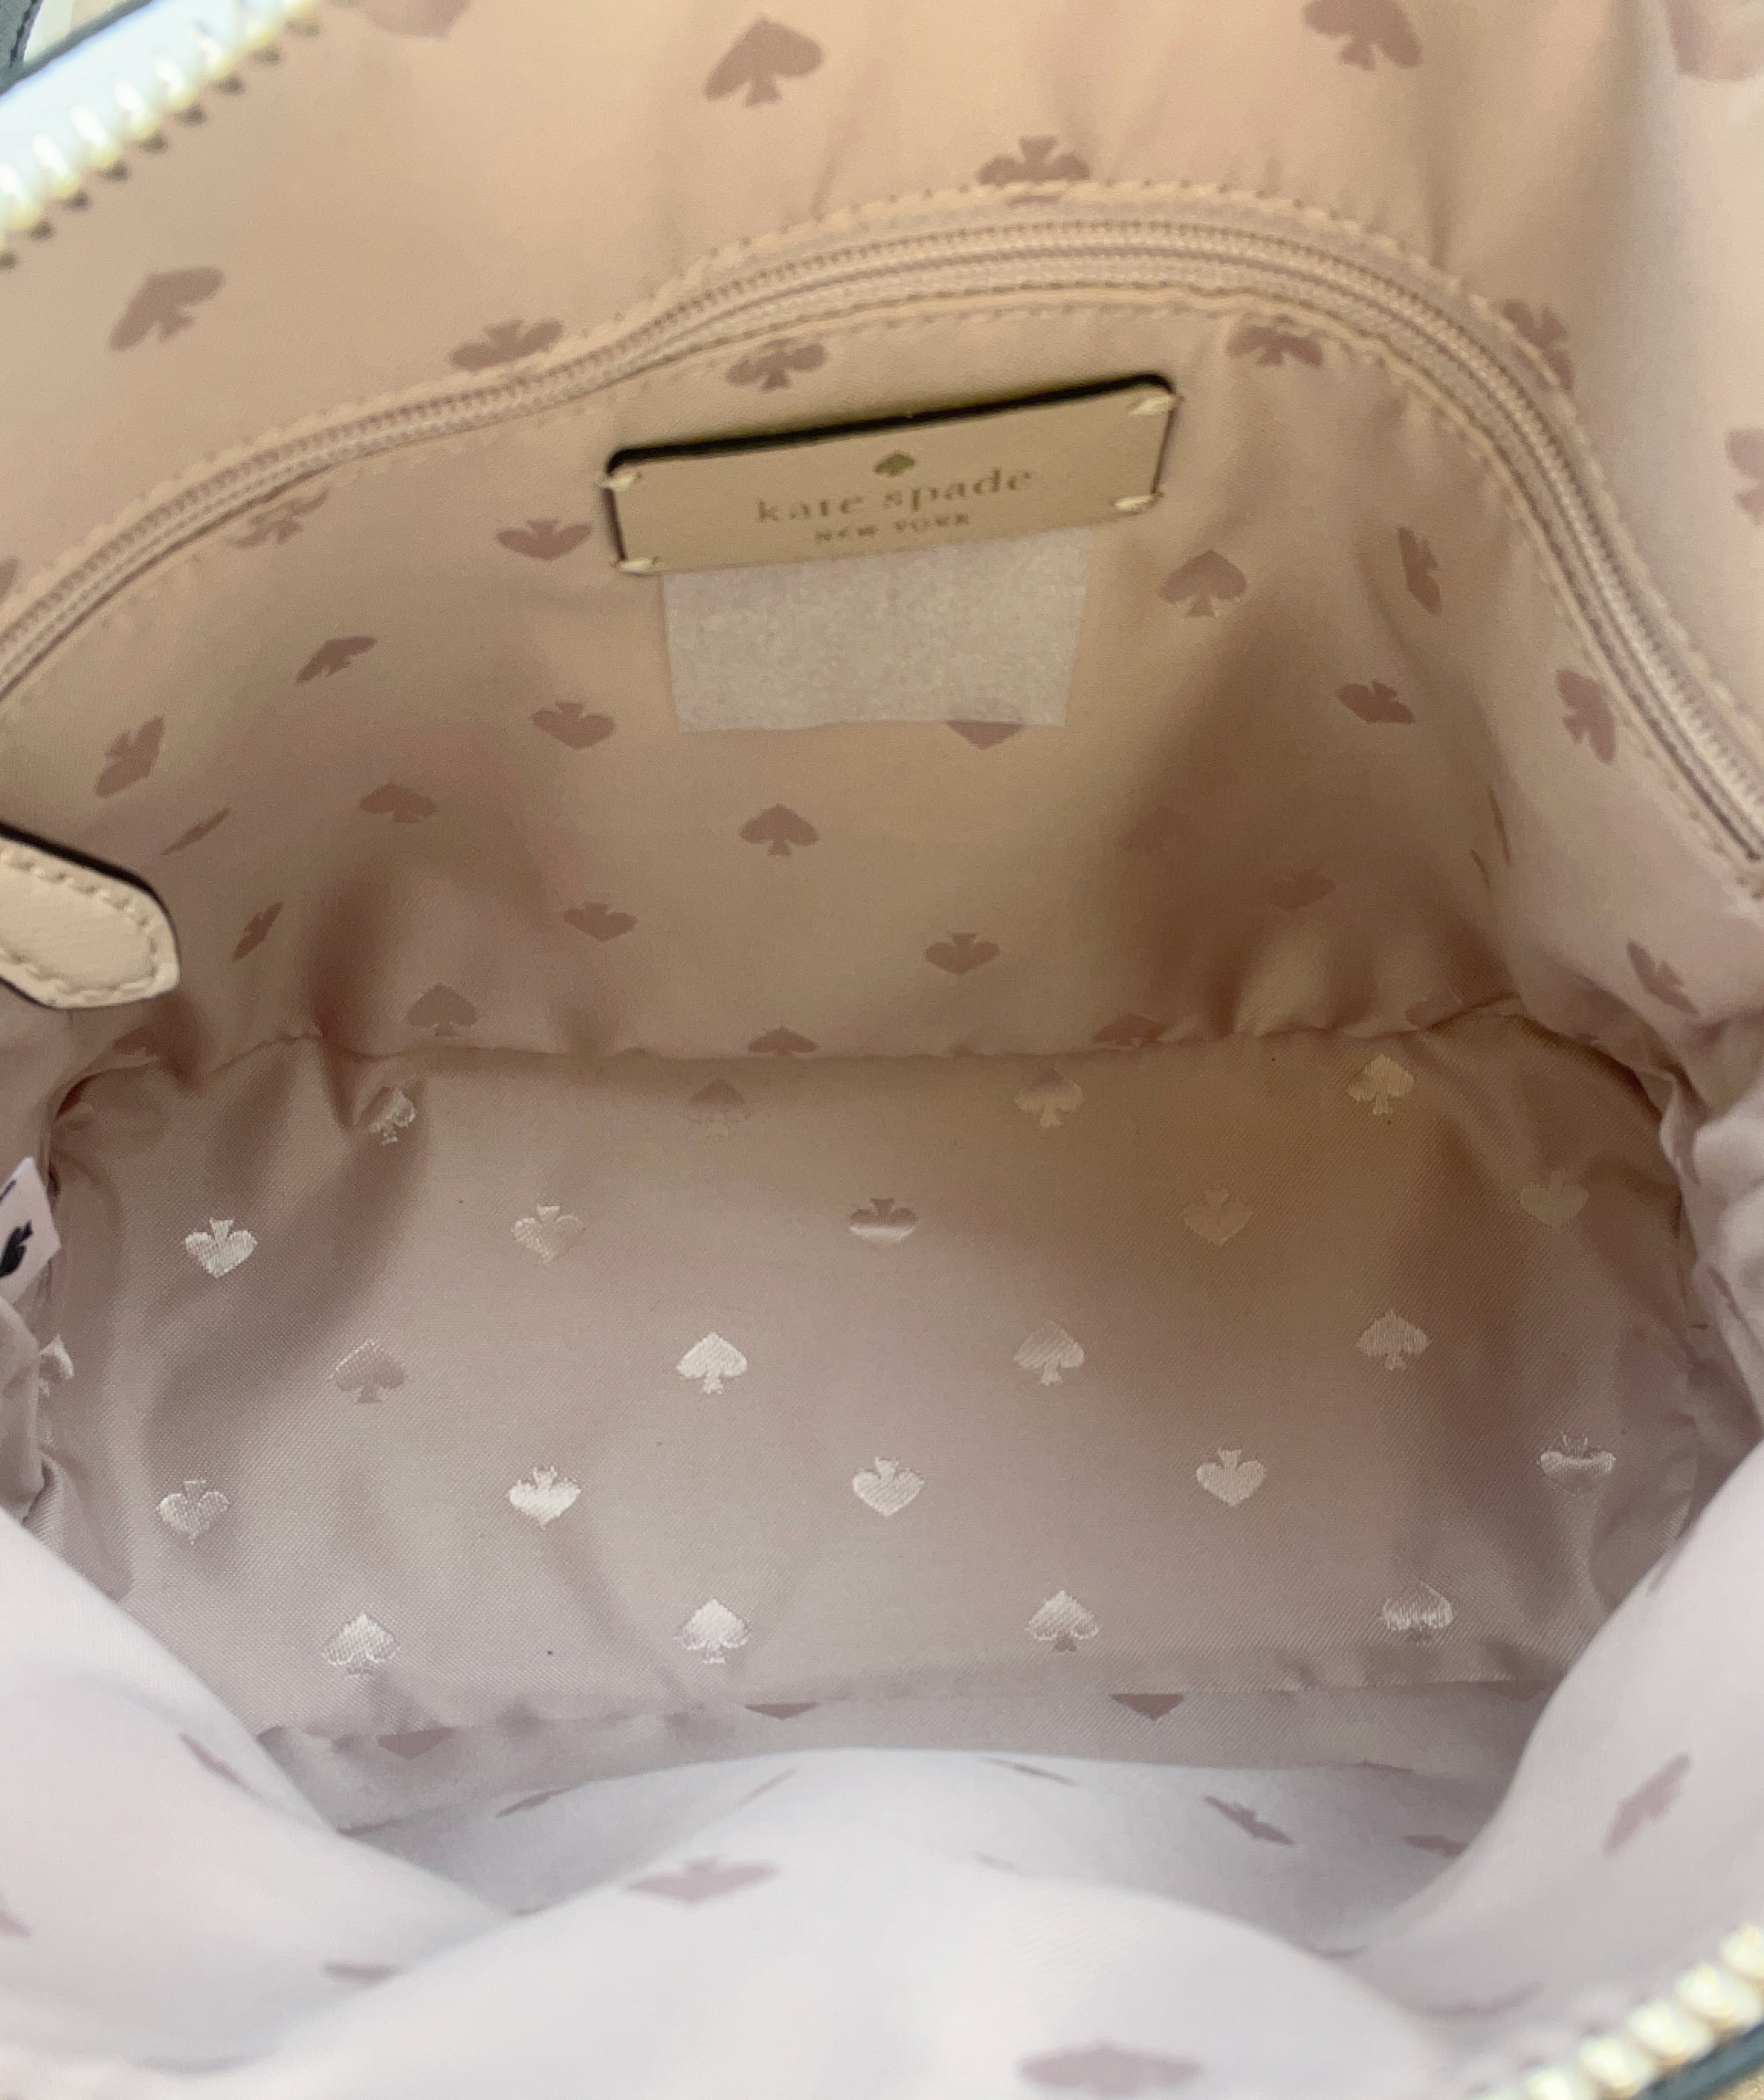 New Kate Spade Staci Saffiano Leather Dome Backpack Warm Beige Multi